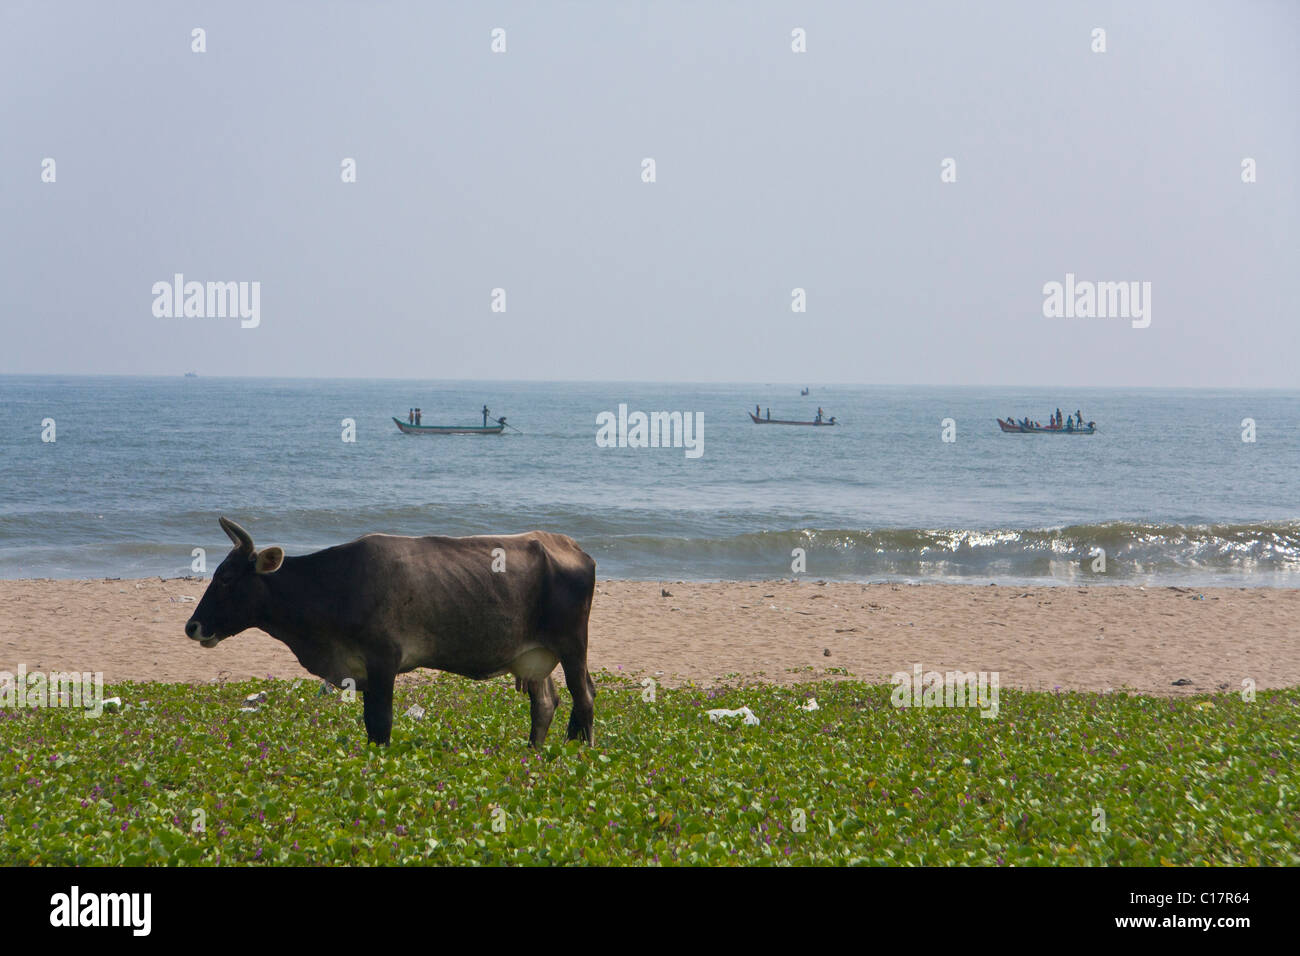 Cow on the beach and boats at the background Stock Photo